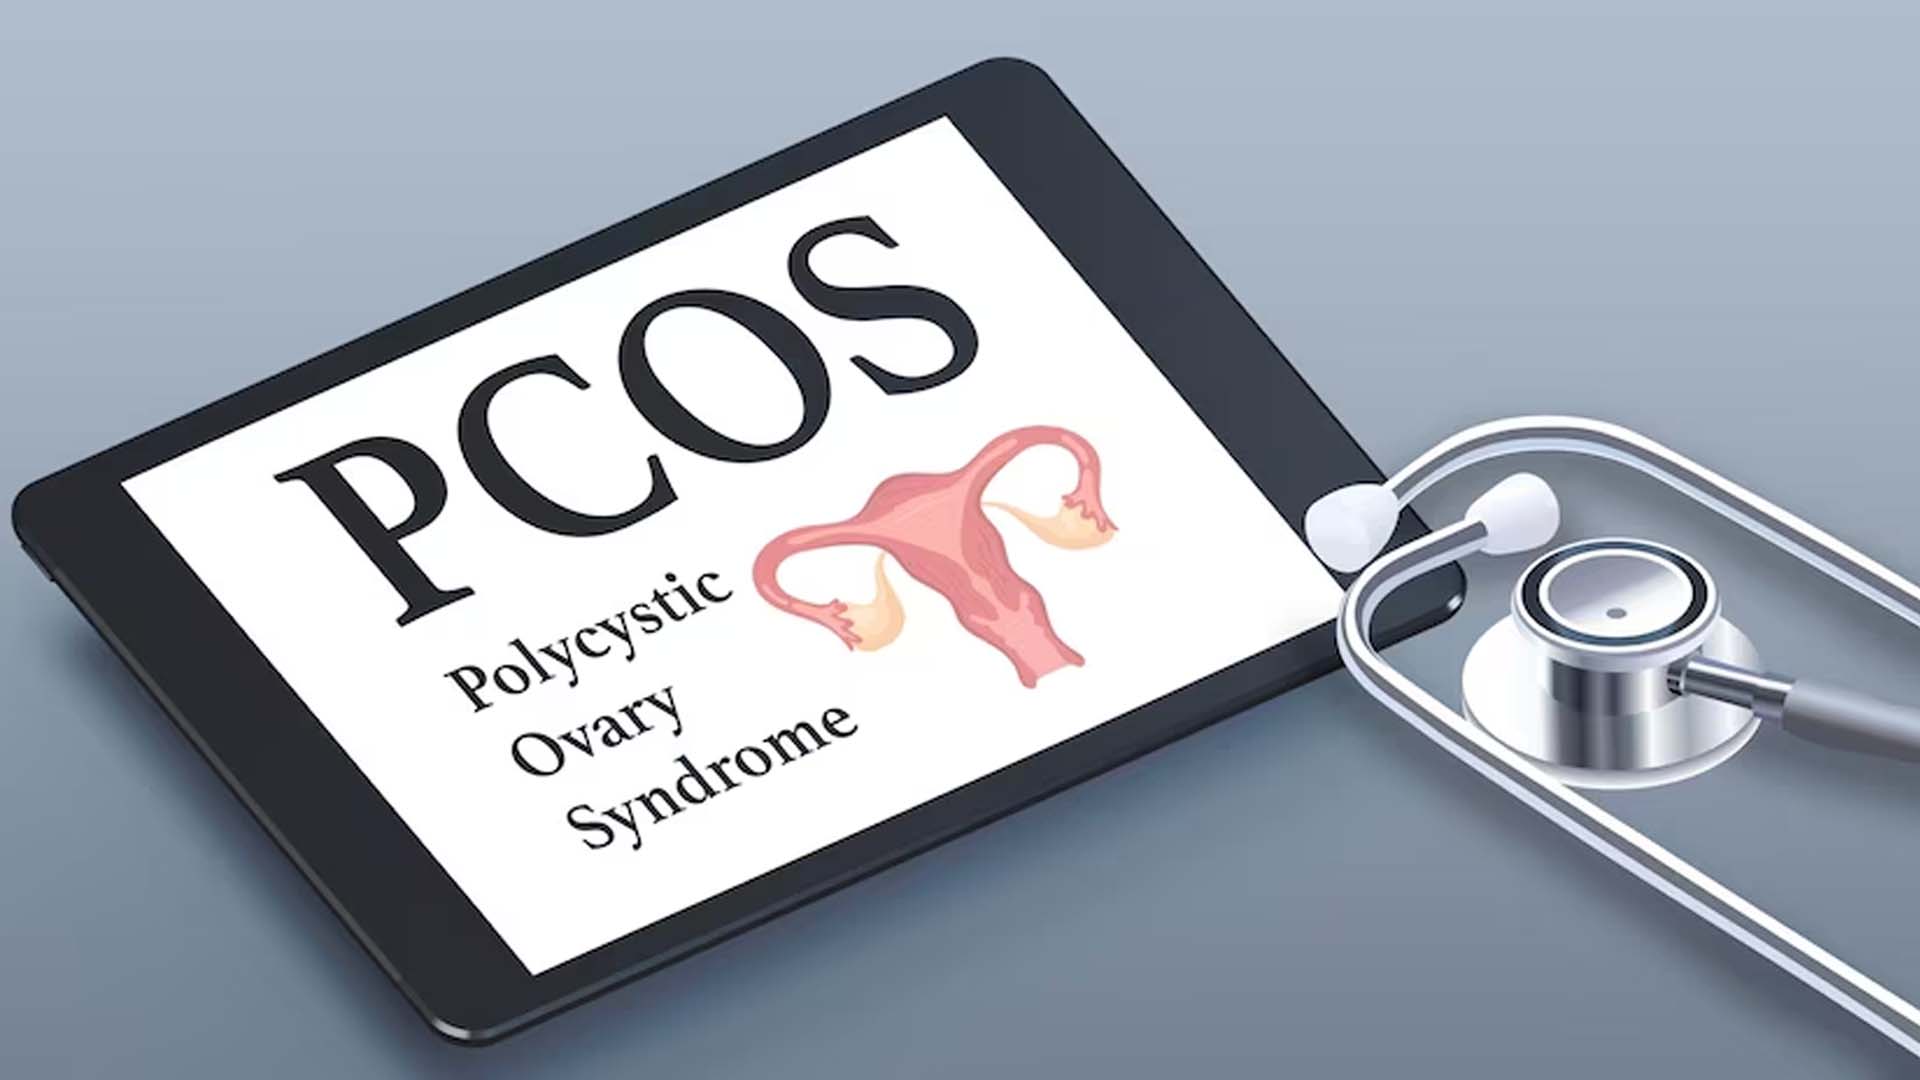 polycystic ovary syndrome (PCOS)